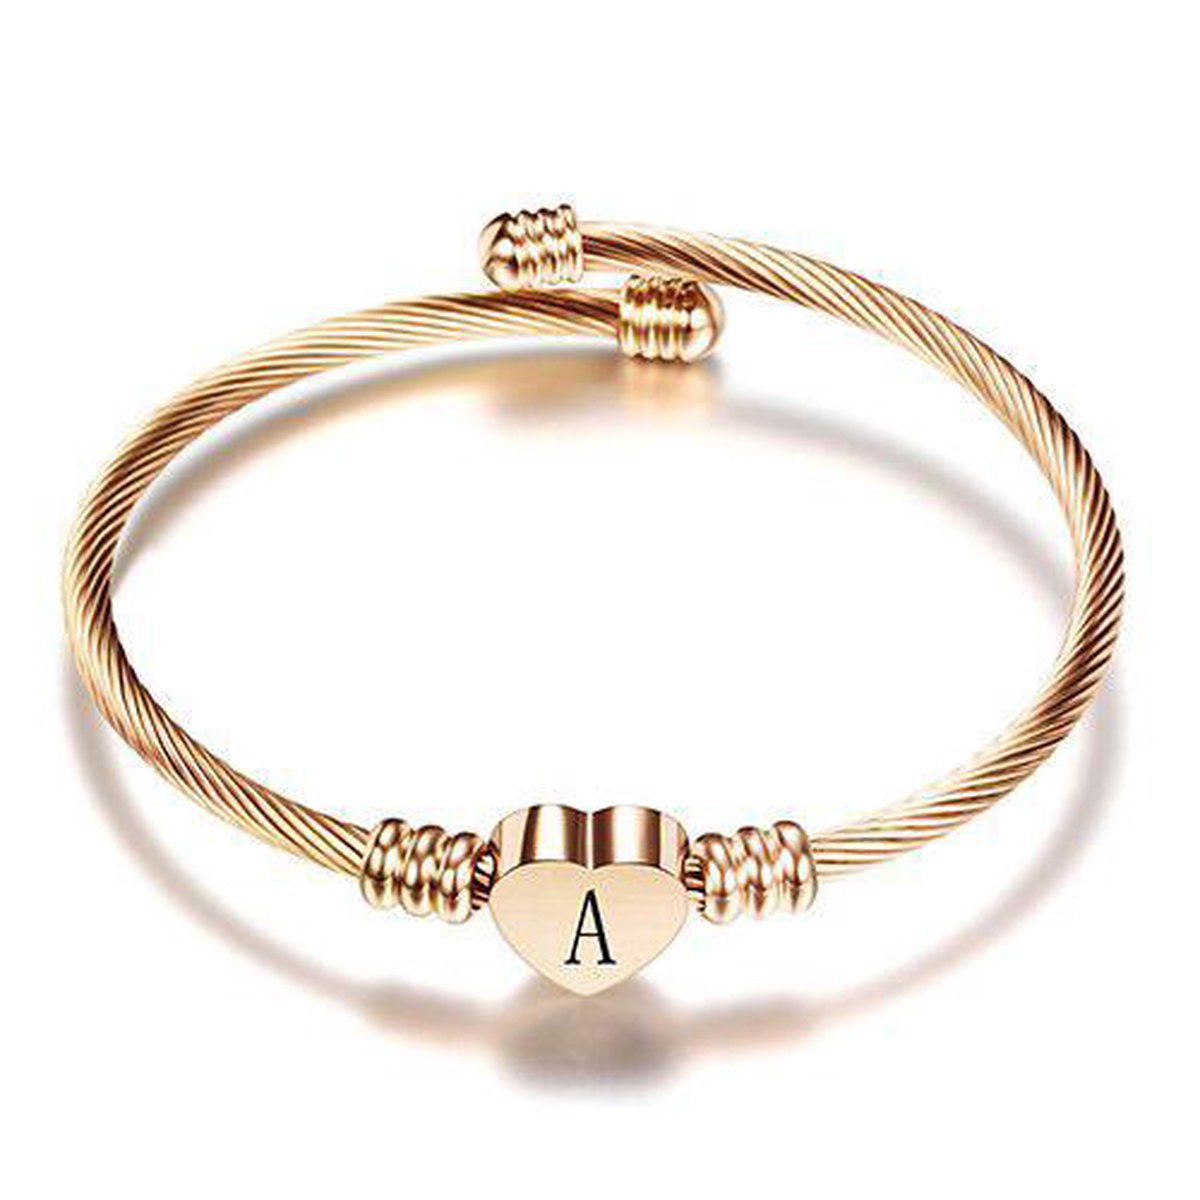 24/7 Jewelry Collection Hart Armband met Letter - Bangle - Initiaal - Rosé Goudkleurig - Letter A - Amodi